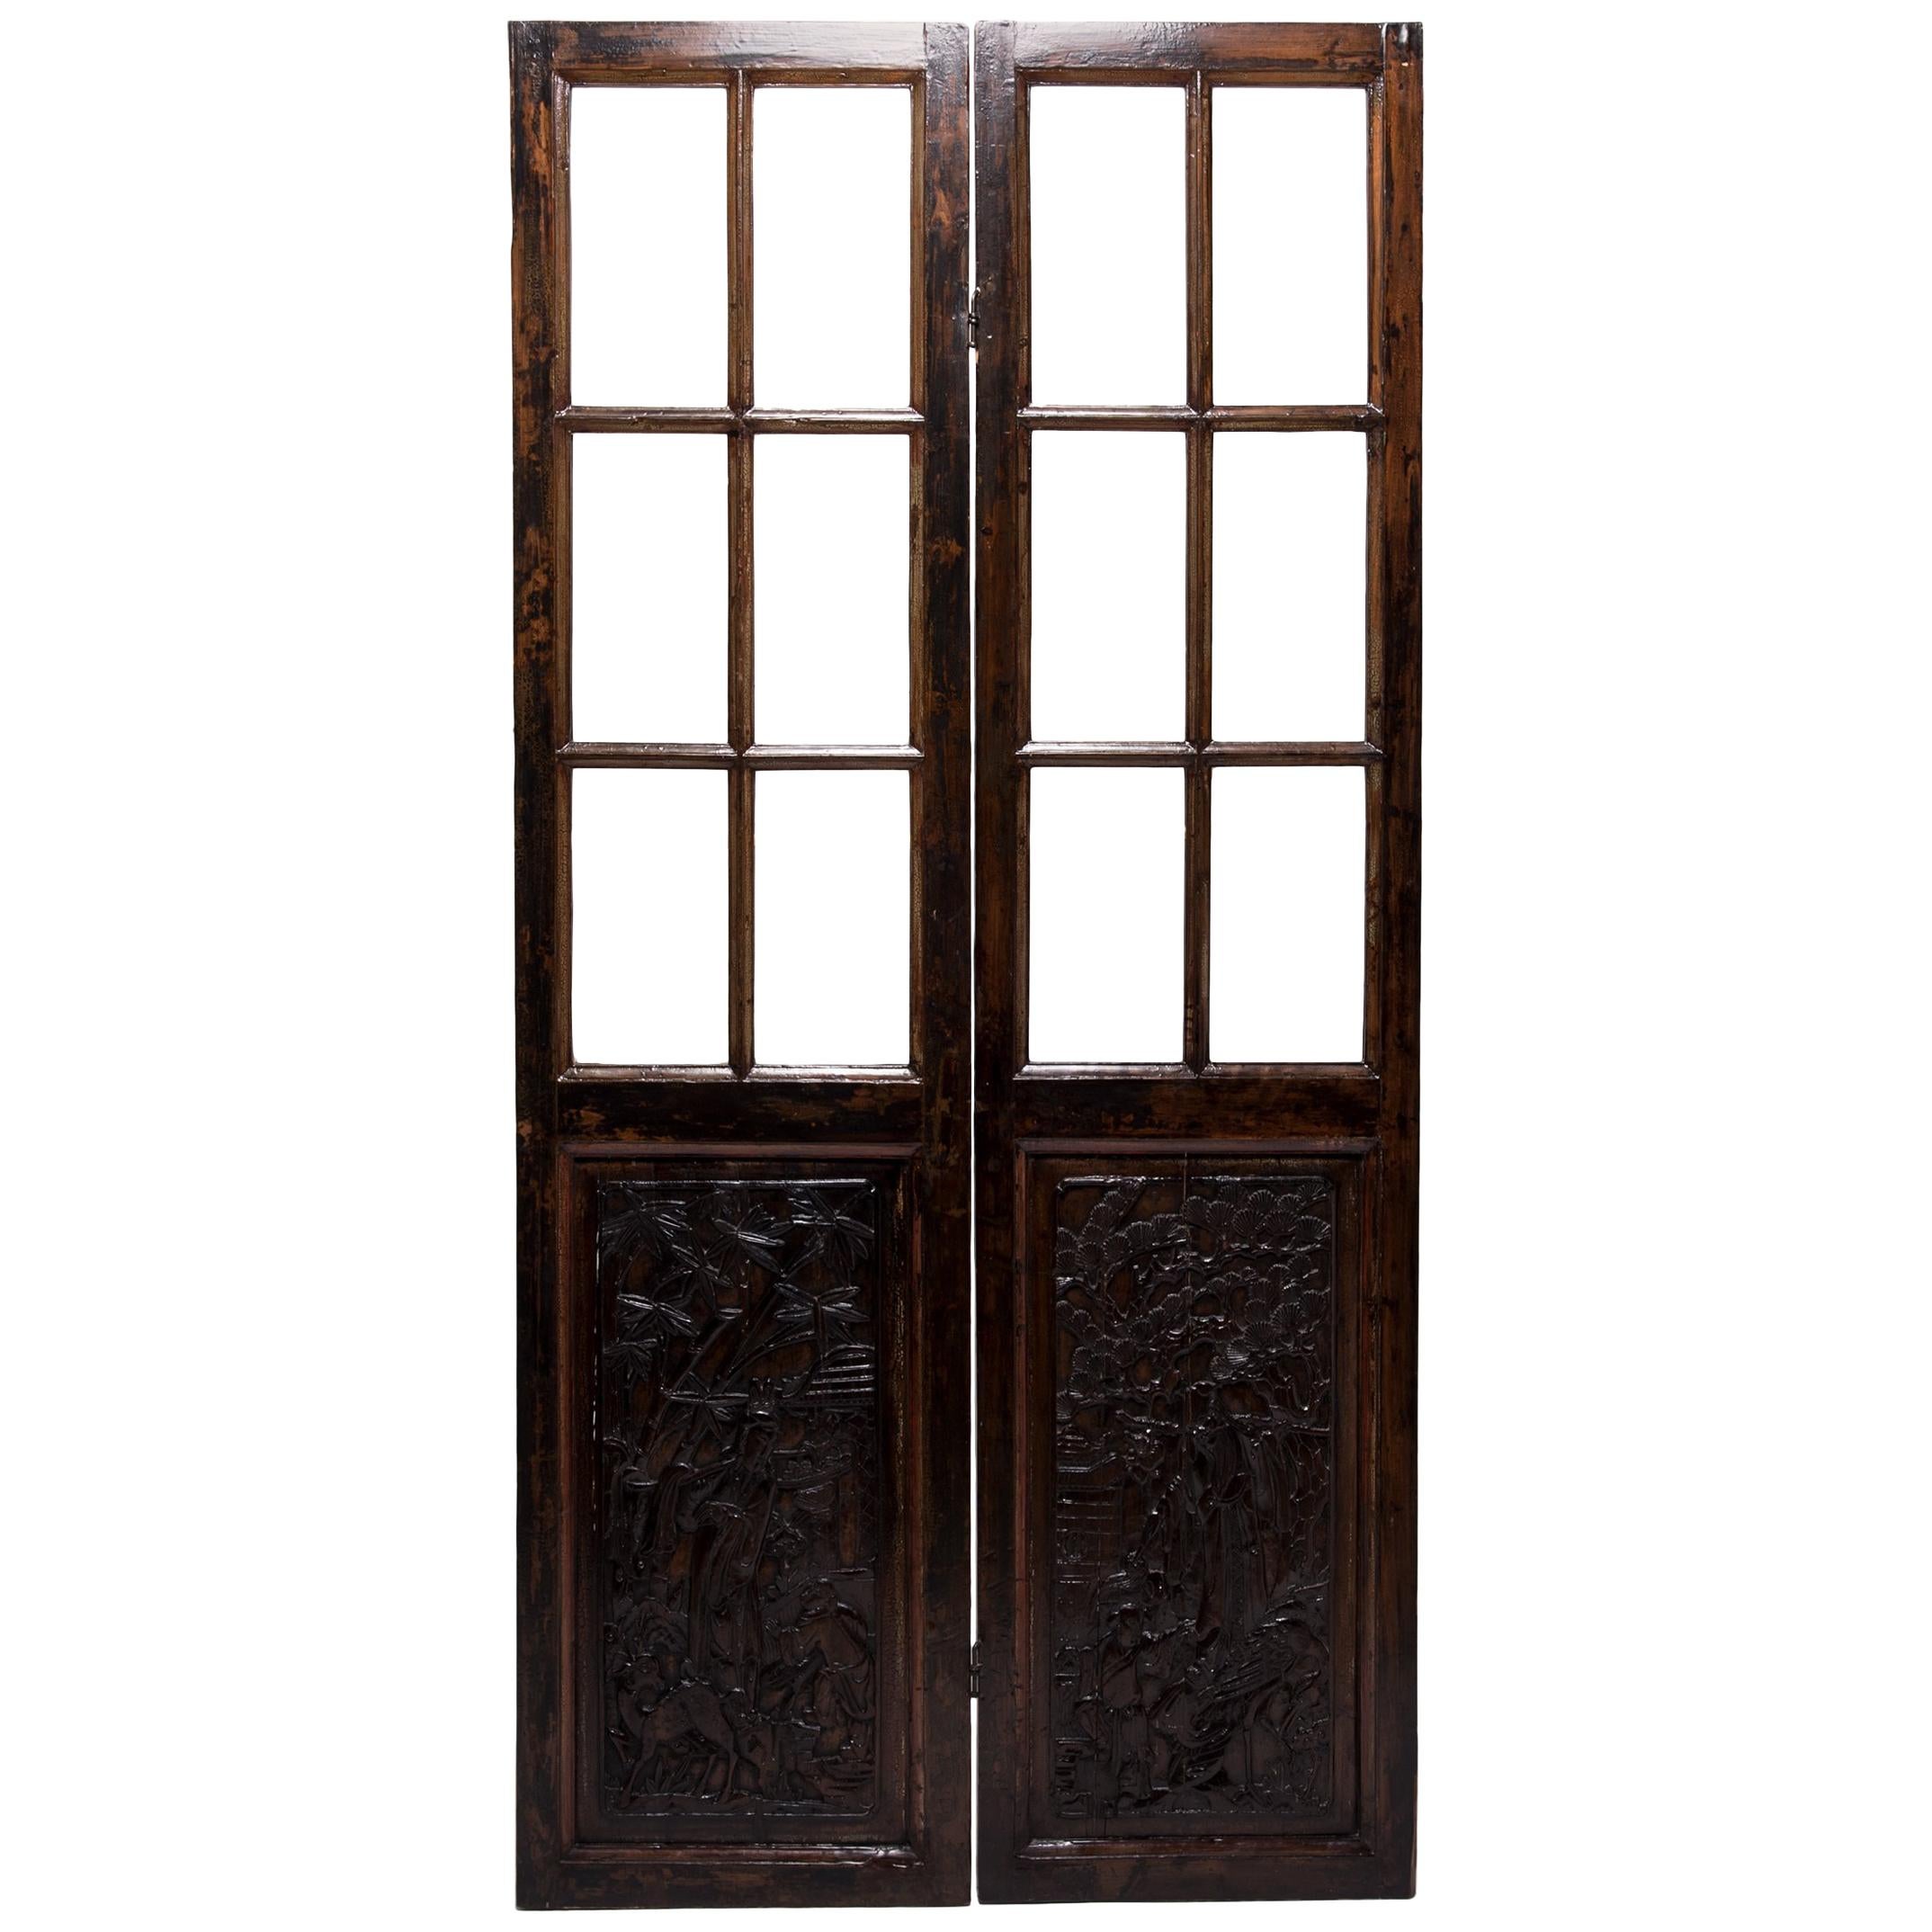 Pair of Chinese Carved Doors with Glass Window Panels, c. 1900